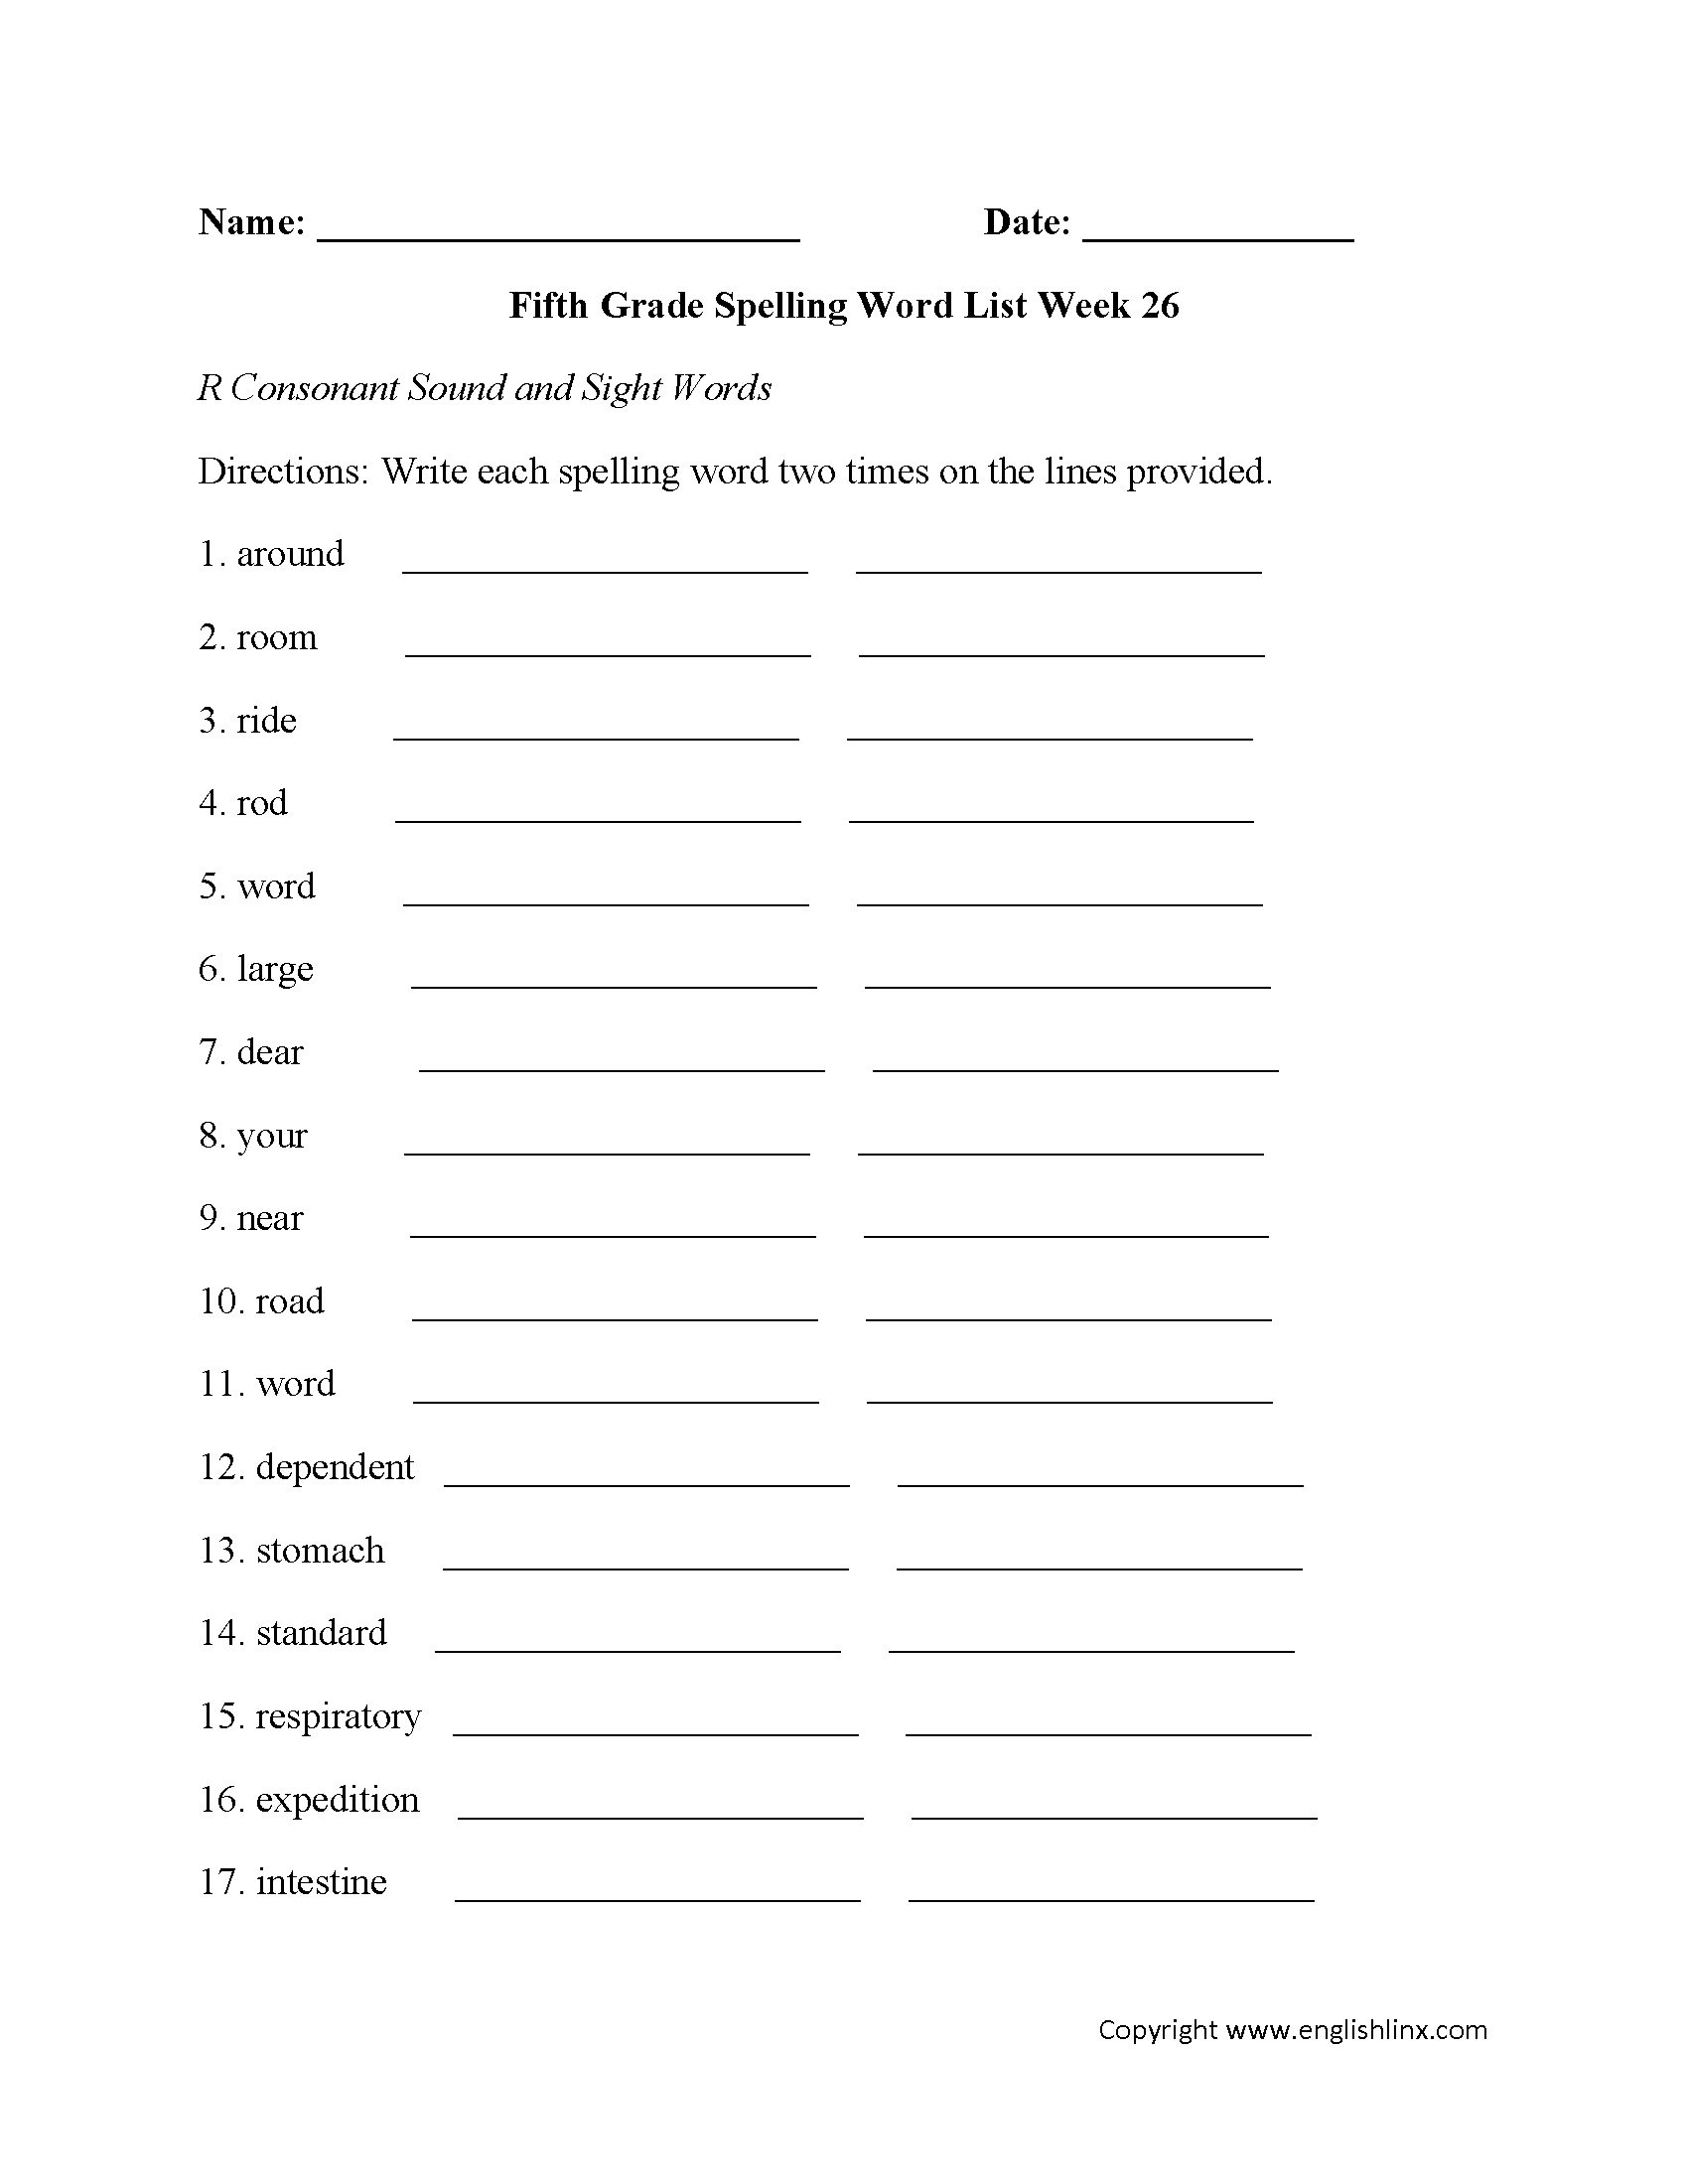 Week 26 R Consonant and Sight Words Fifth Grade Spelling Words Worksheets